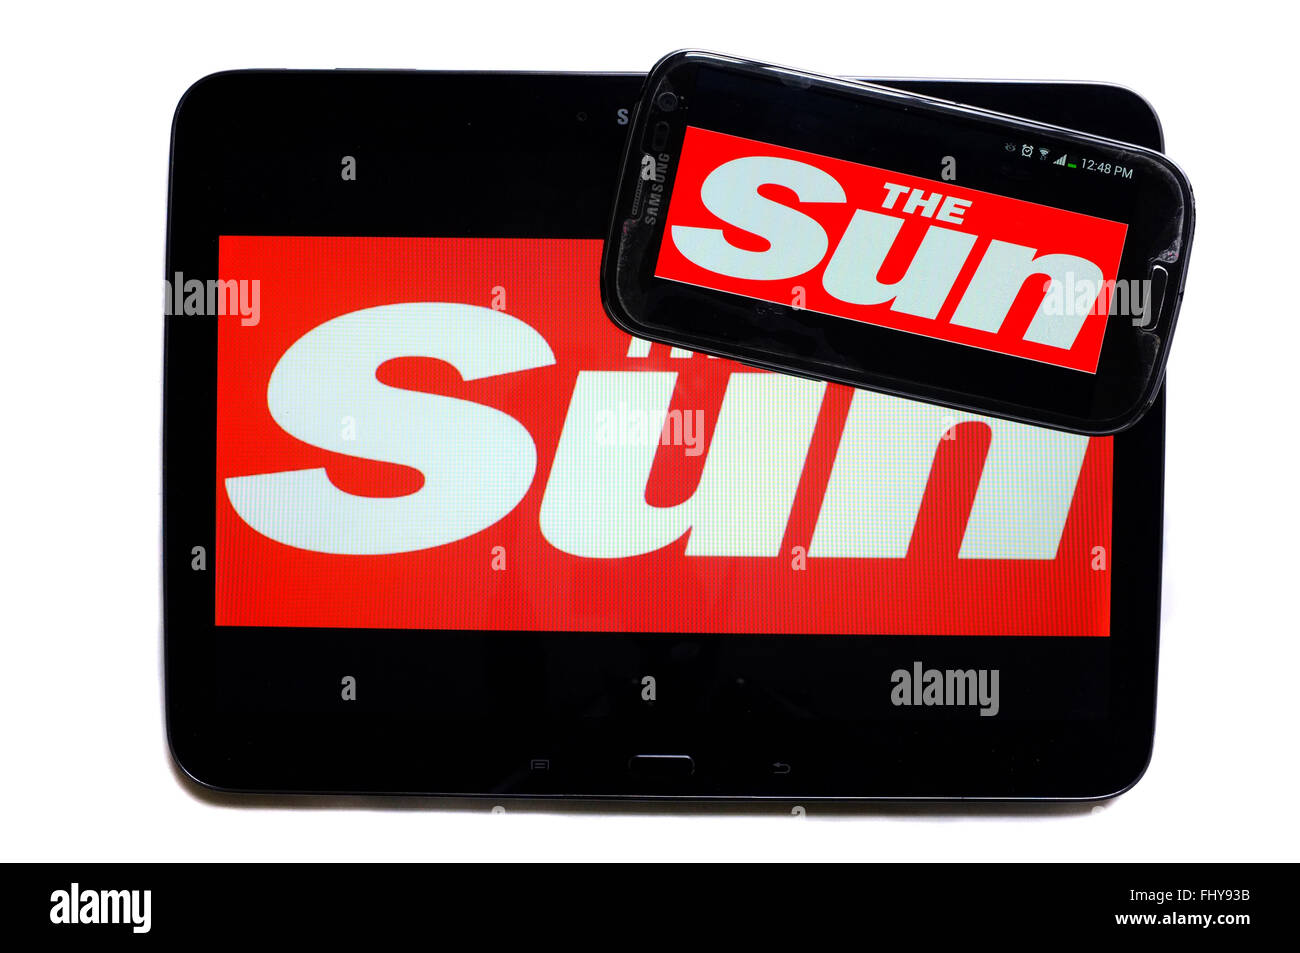 The logo of The Sun newspaper displayed on the screens of a tablet and a smartphone. Stock Photo